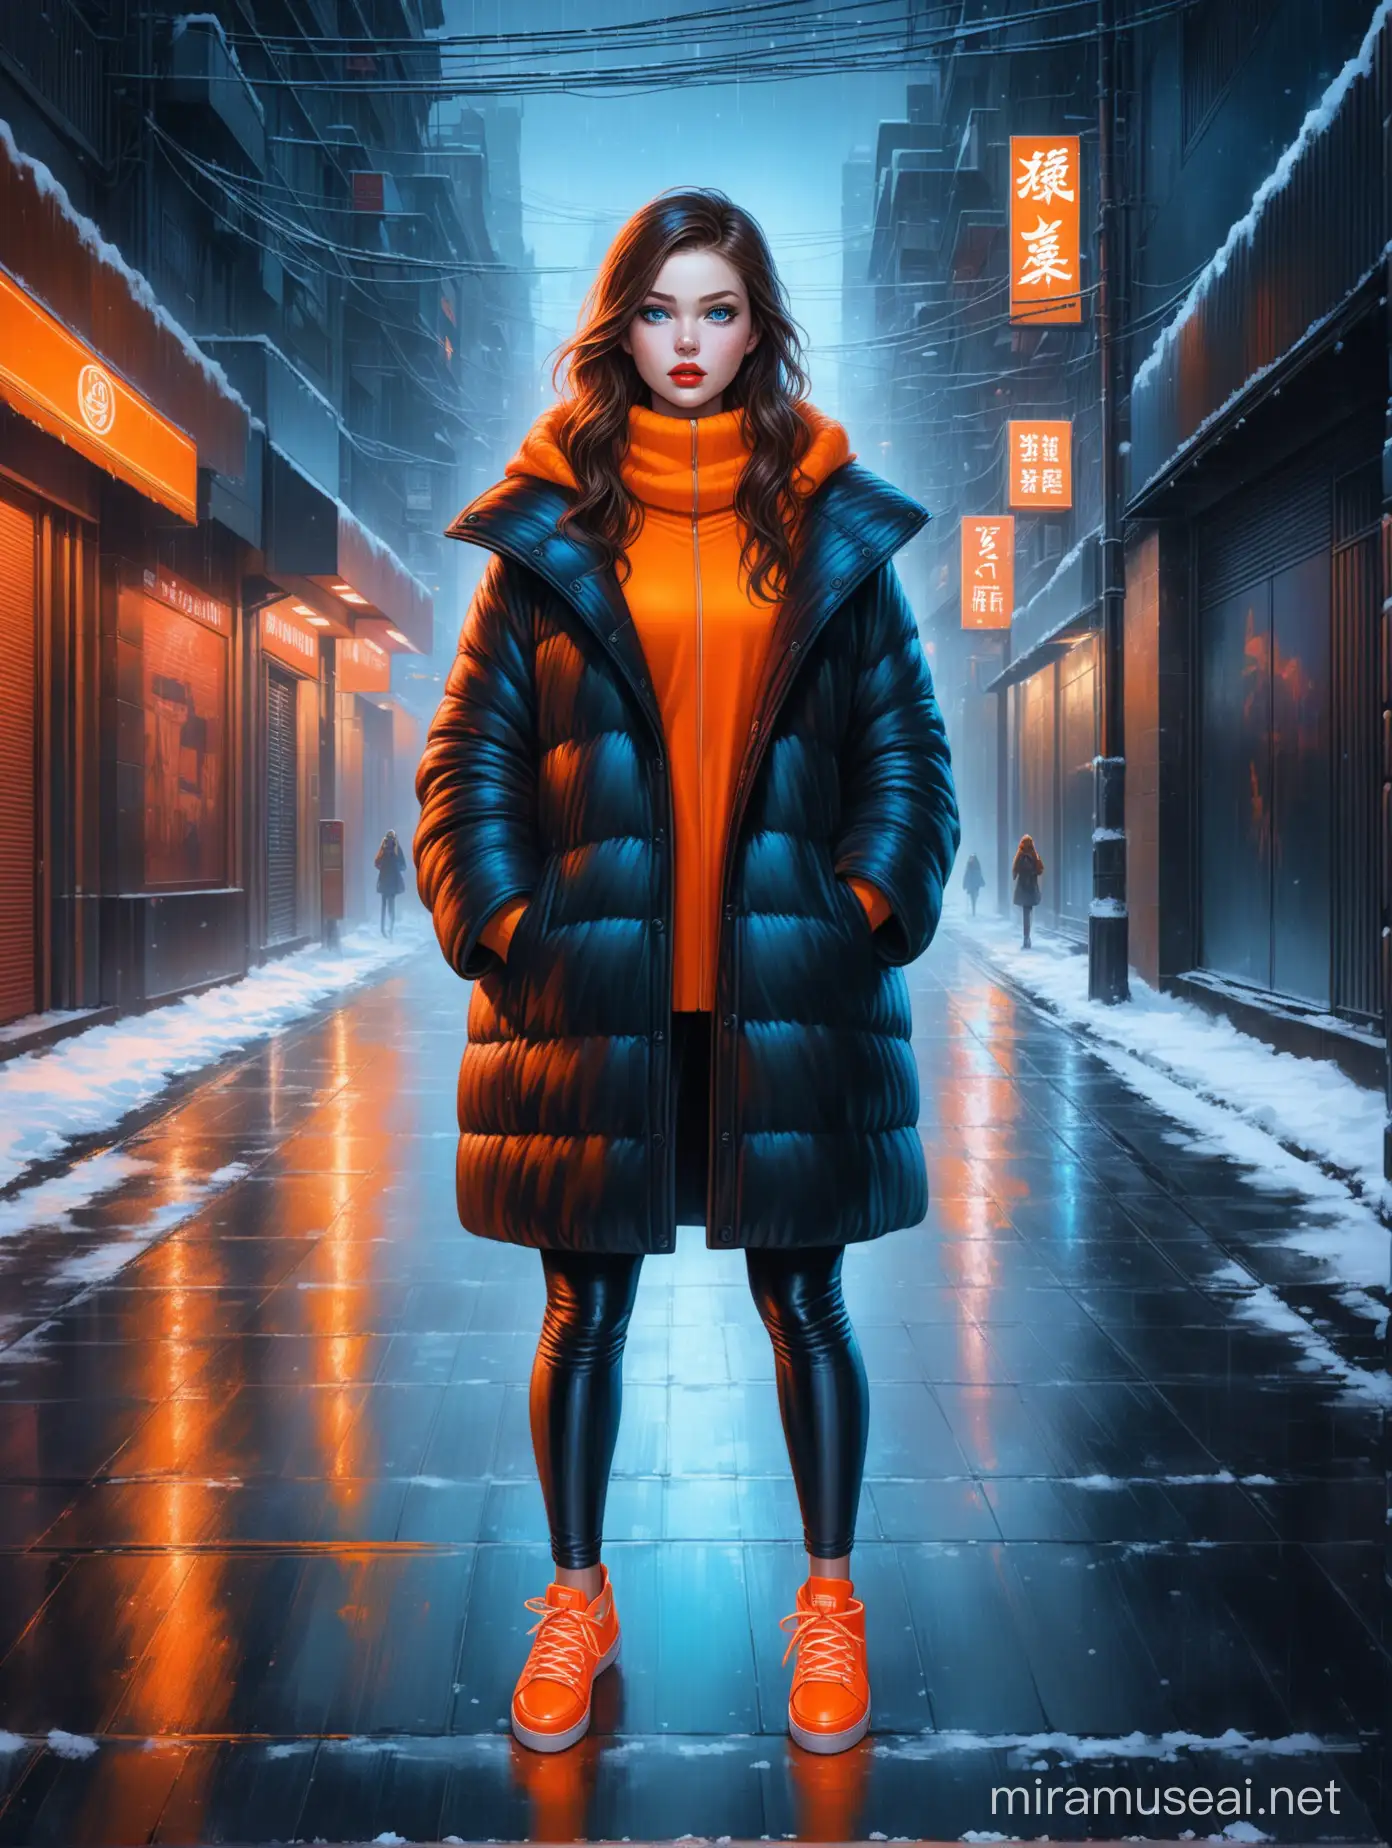 Neon Winter Fashion Portrait Beautiful Young Woman in Dramatic Expression